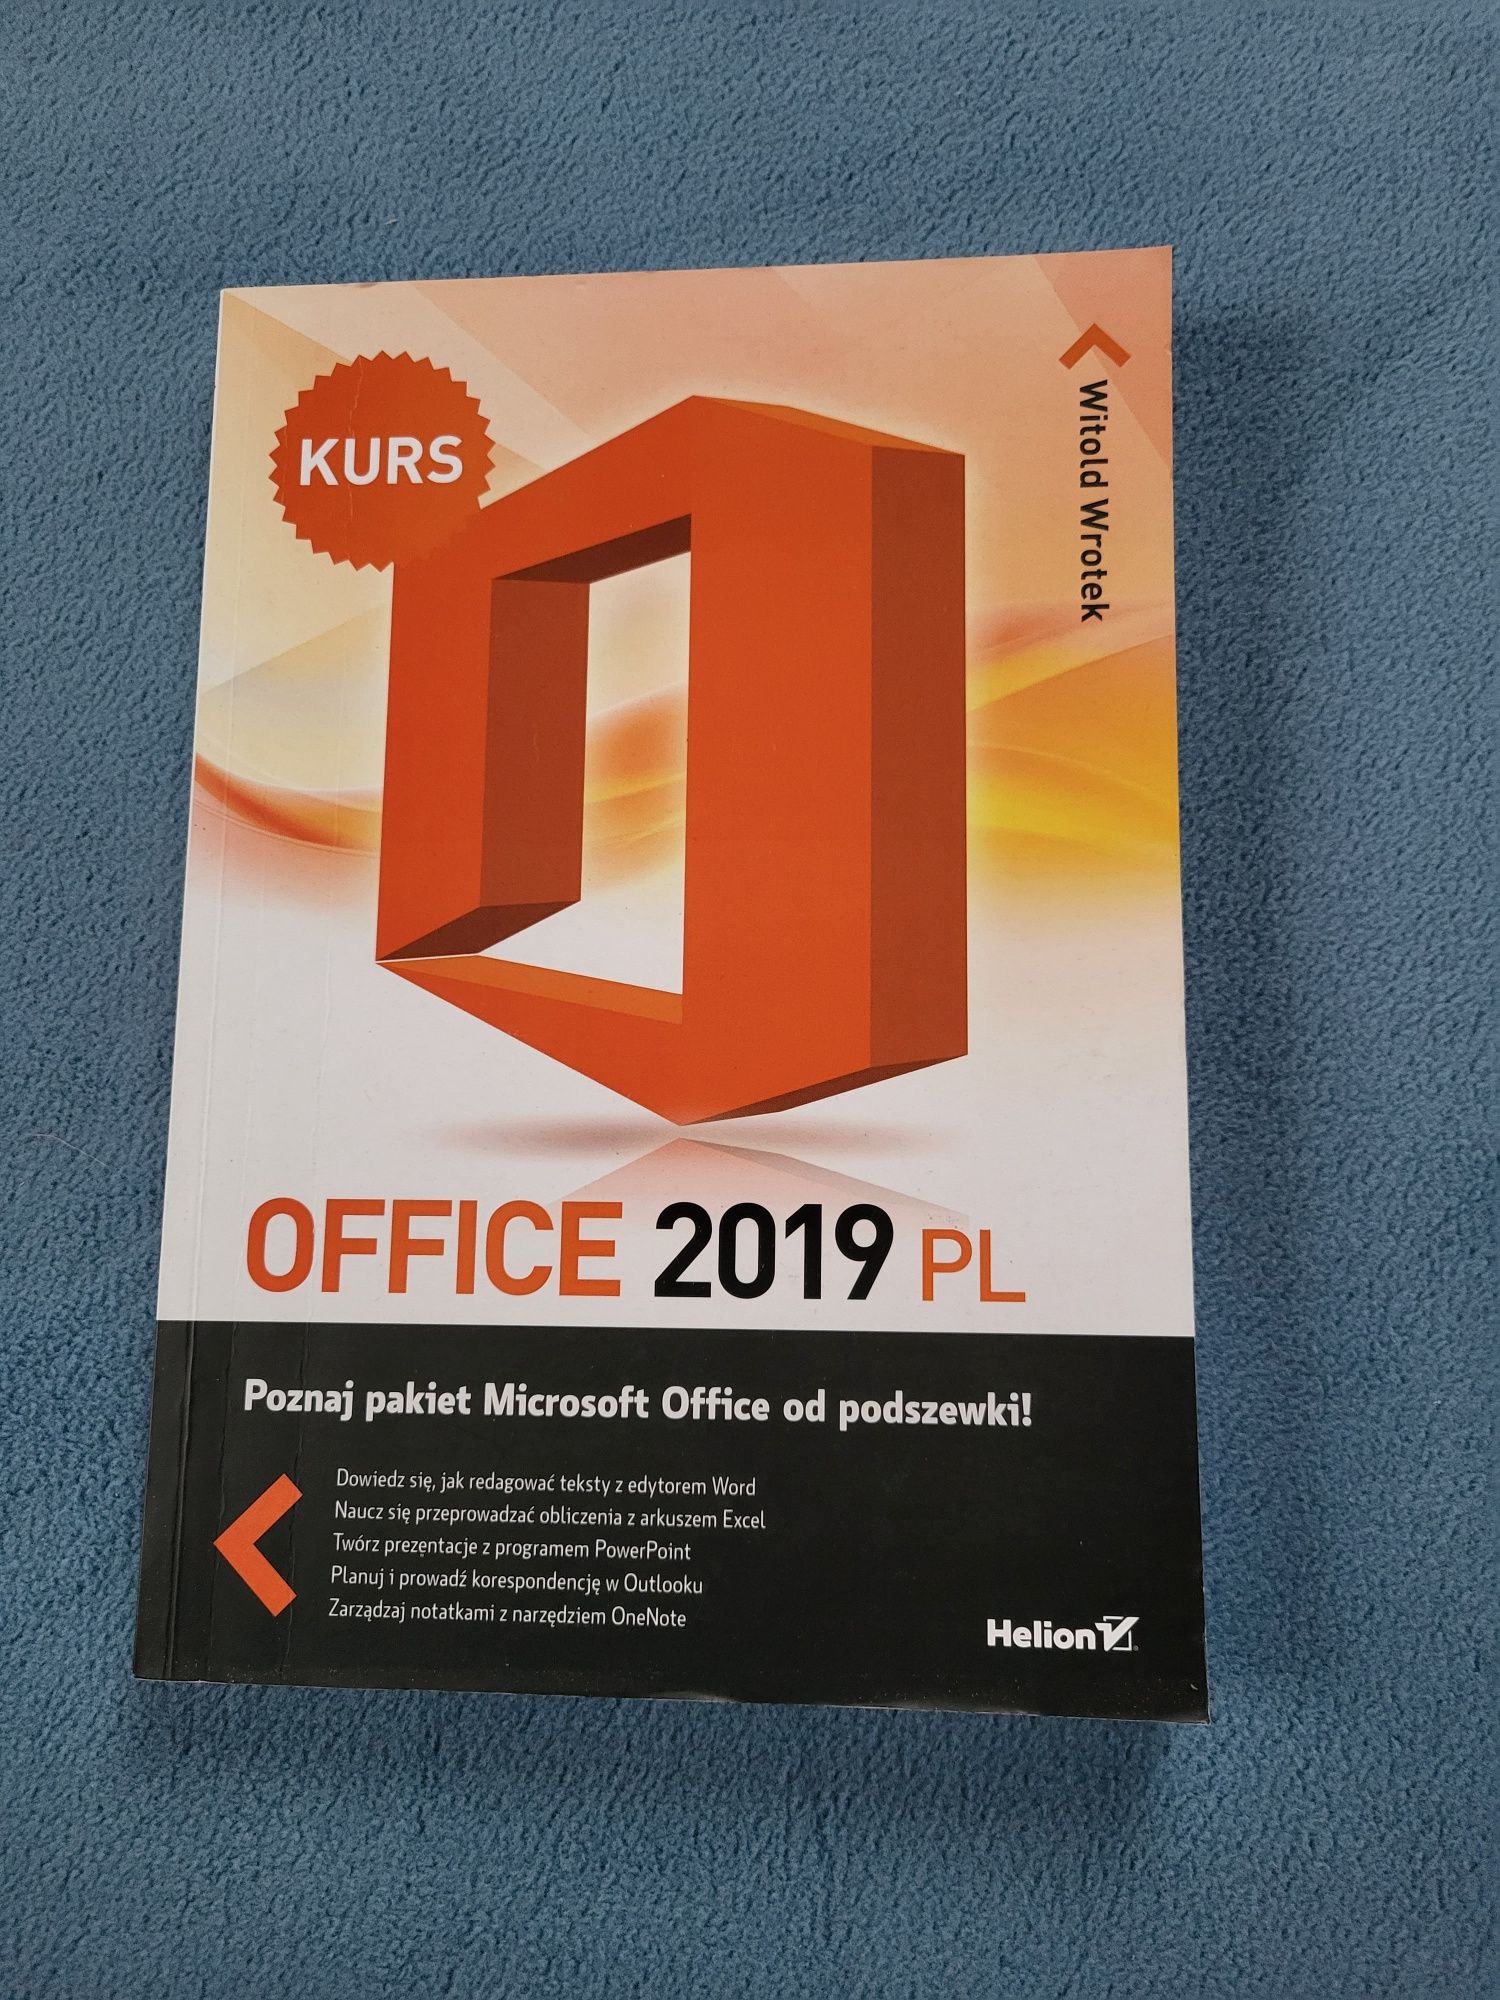 Kurs Office 2019 PL, Witold Wrotek